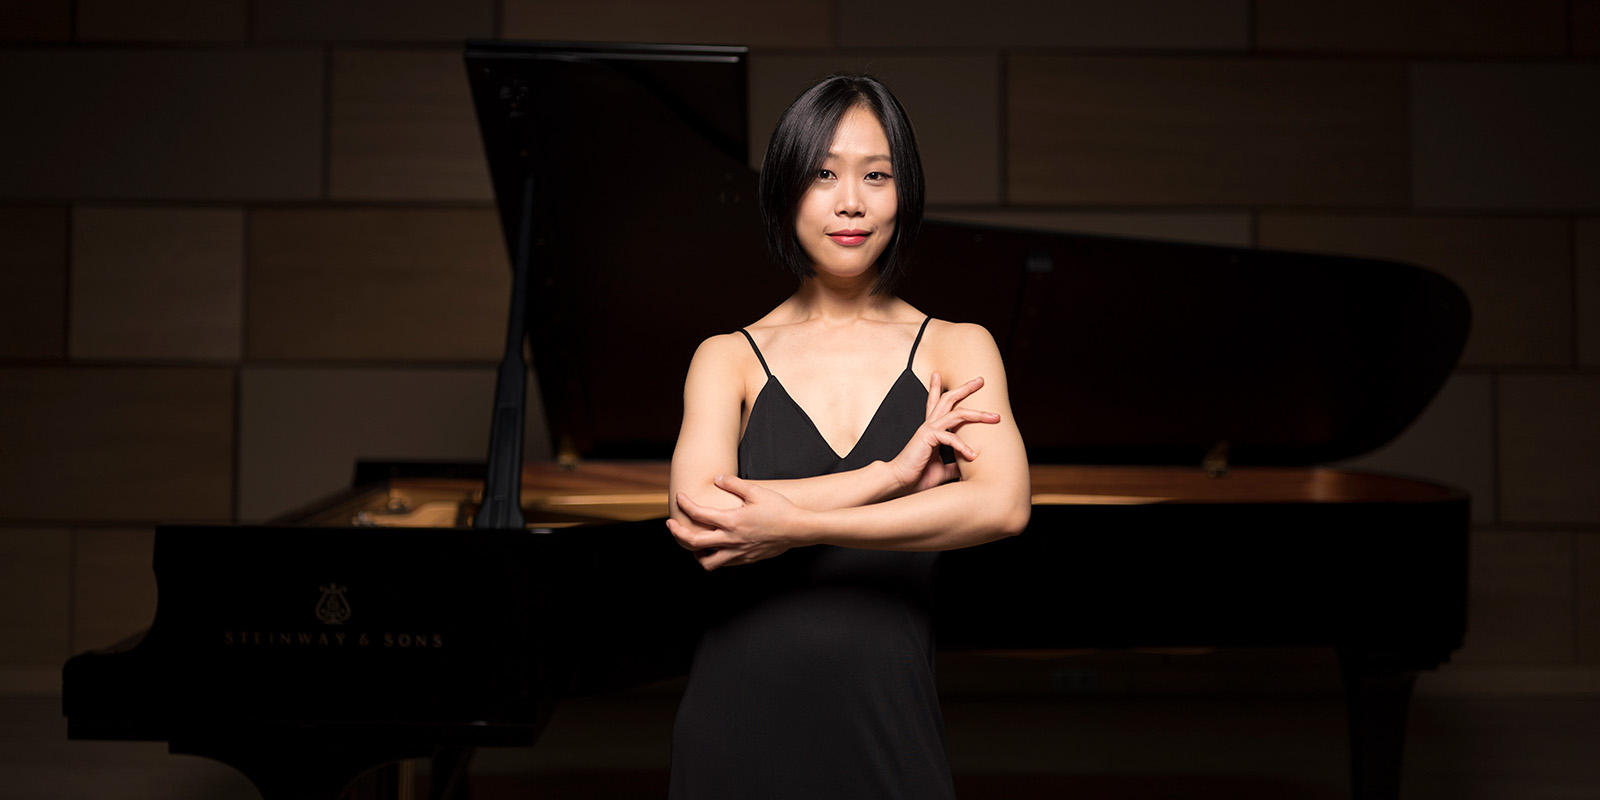 A woman with short dark hair stands in front of a black grand piano with her arms crossed.